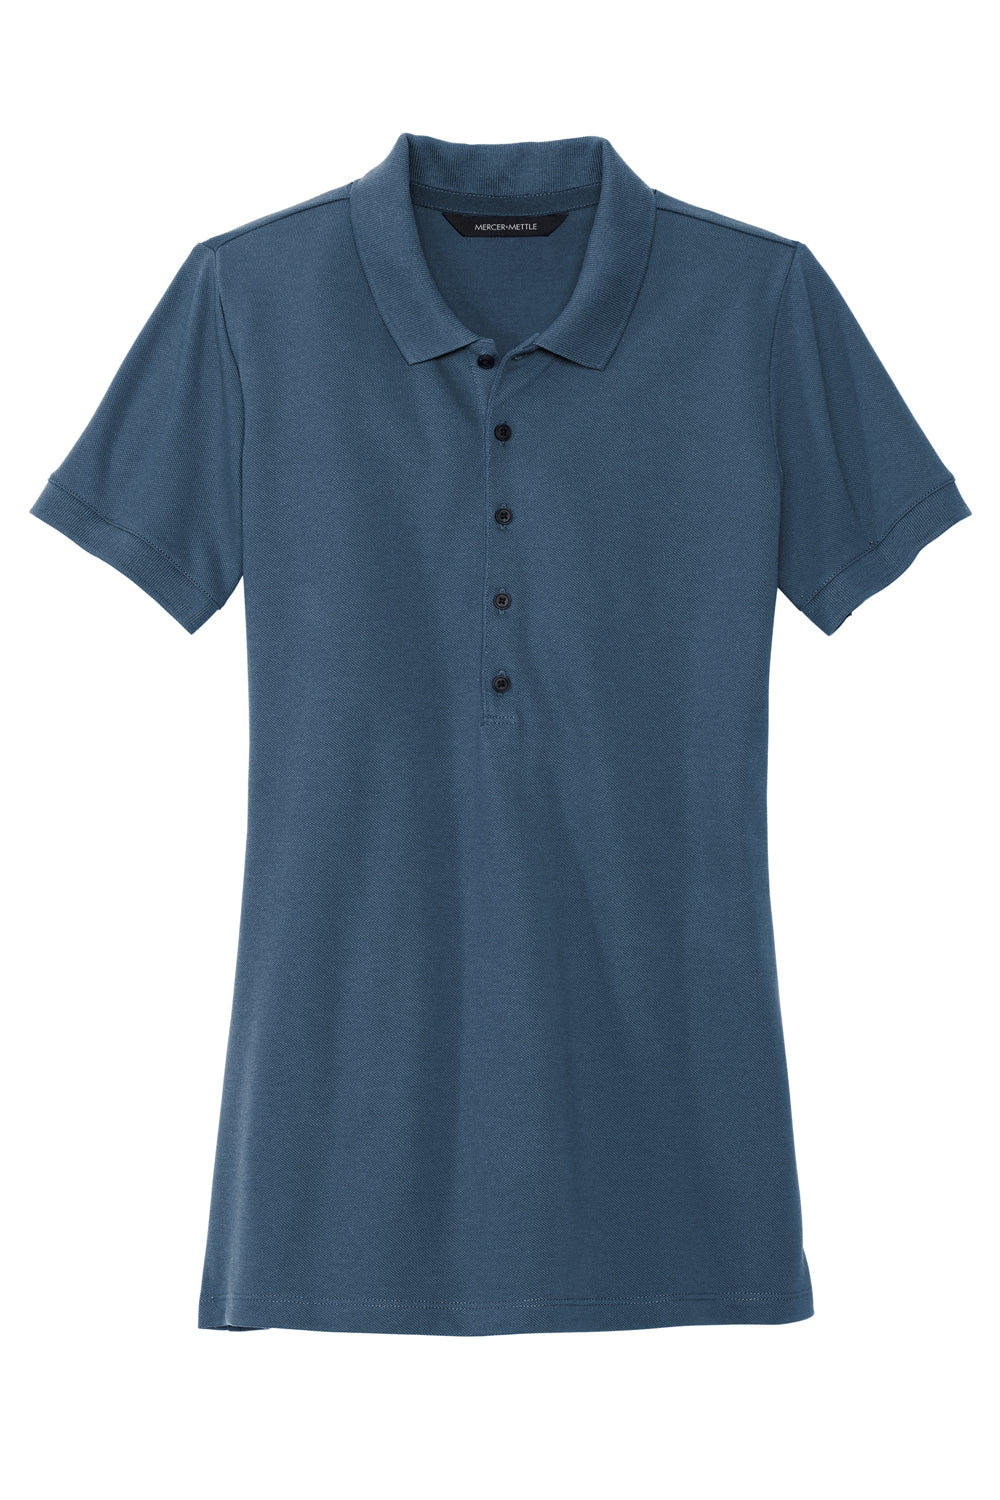 Mercer+Mettle MM1001 Stretch Pique Short Sleeve Polo Shirt Insignia Blue Flat Front